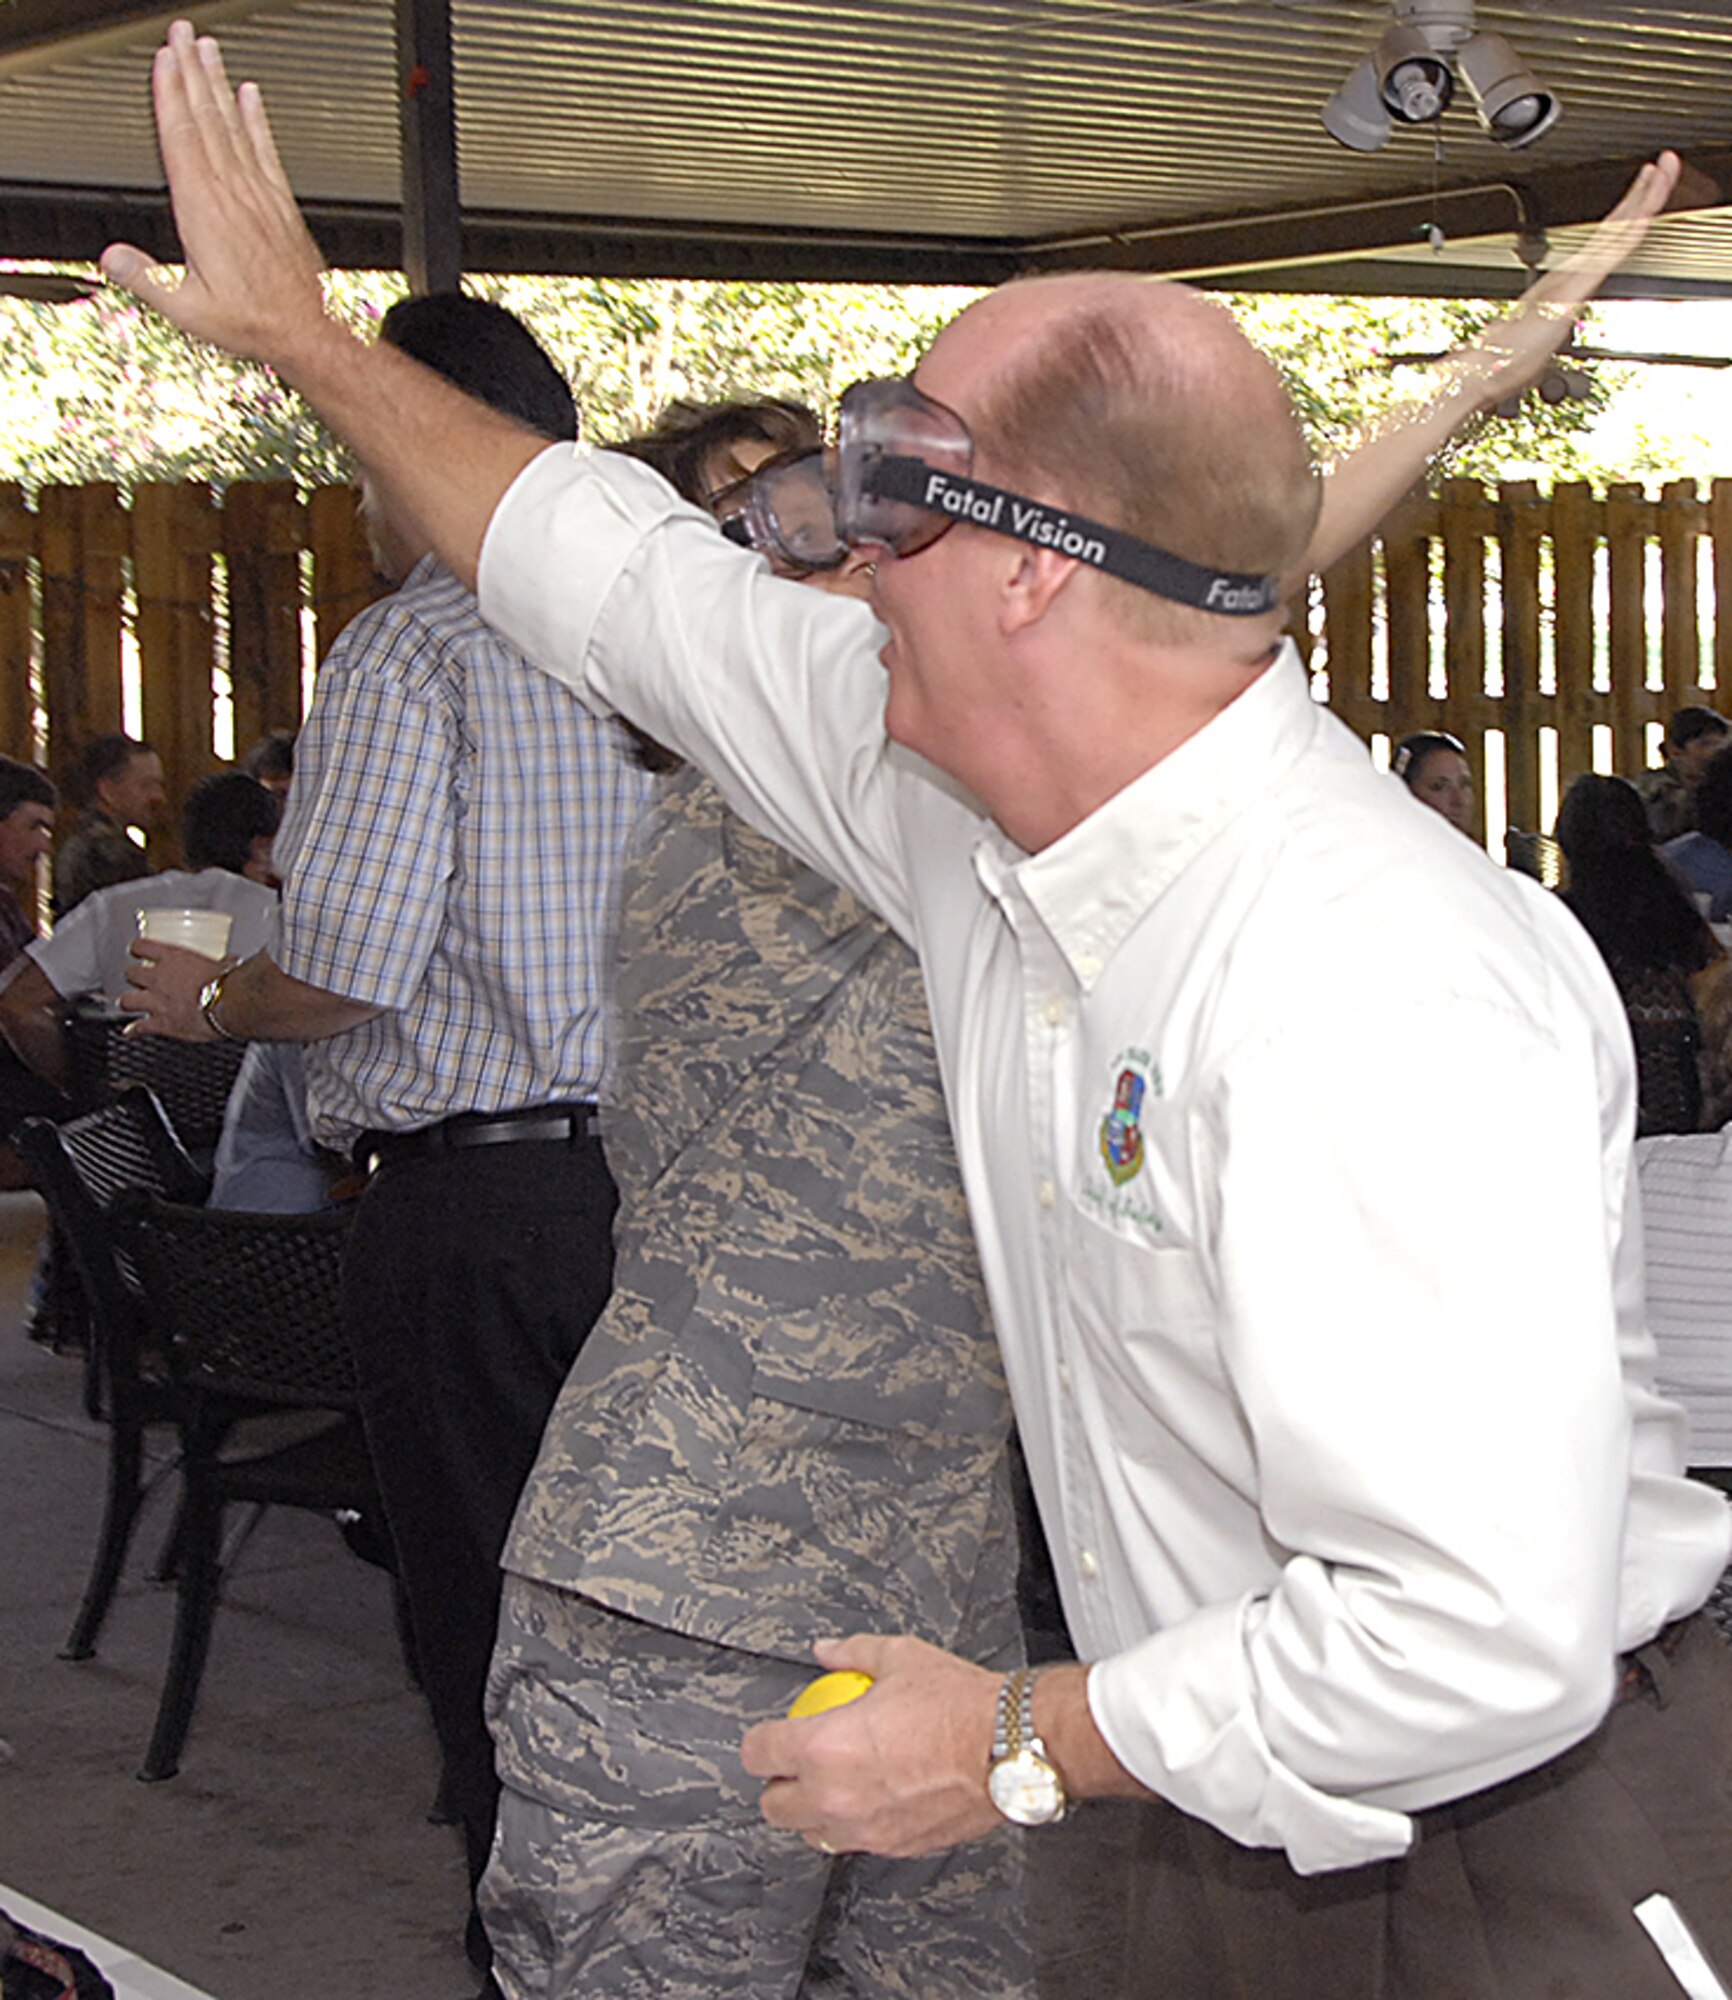 James Zillweger, the 82nd Training Wing Chief of Safety, and 882nd Training Group Commander Col. Nancy Dezell demonstrate Oct. 5 how difficult it is to complete something as simple as a high-five when vision and judgment is impaired at the "DUI Free - Prevention is Key" picnic at the Sheppard Club. Team Sheppard members were rewarded with the Italian-style picnic for going 143 days without a driving under the influence incident, but also urged to refocus as people begin to prepare for the holiday season. (U.S. Air Force photo/Harry Tonemah)